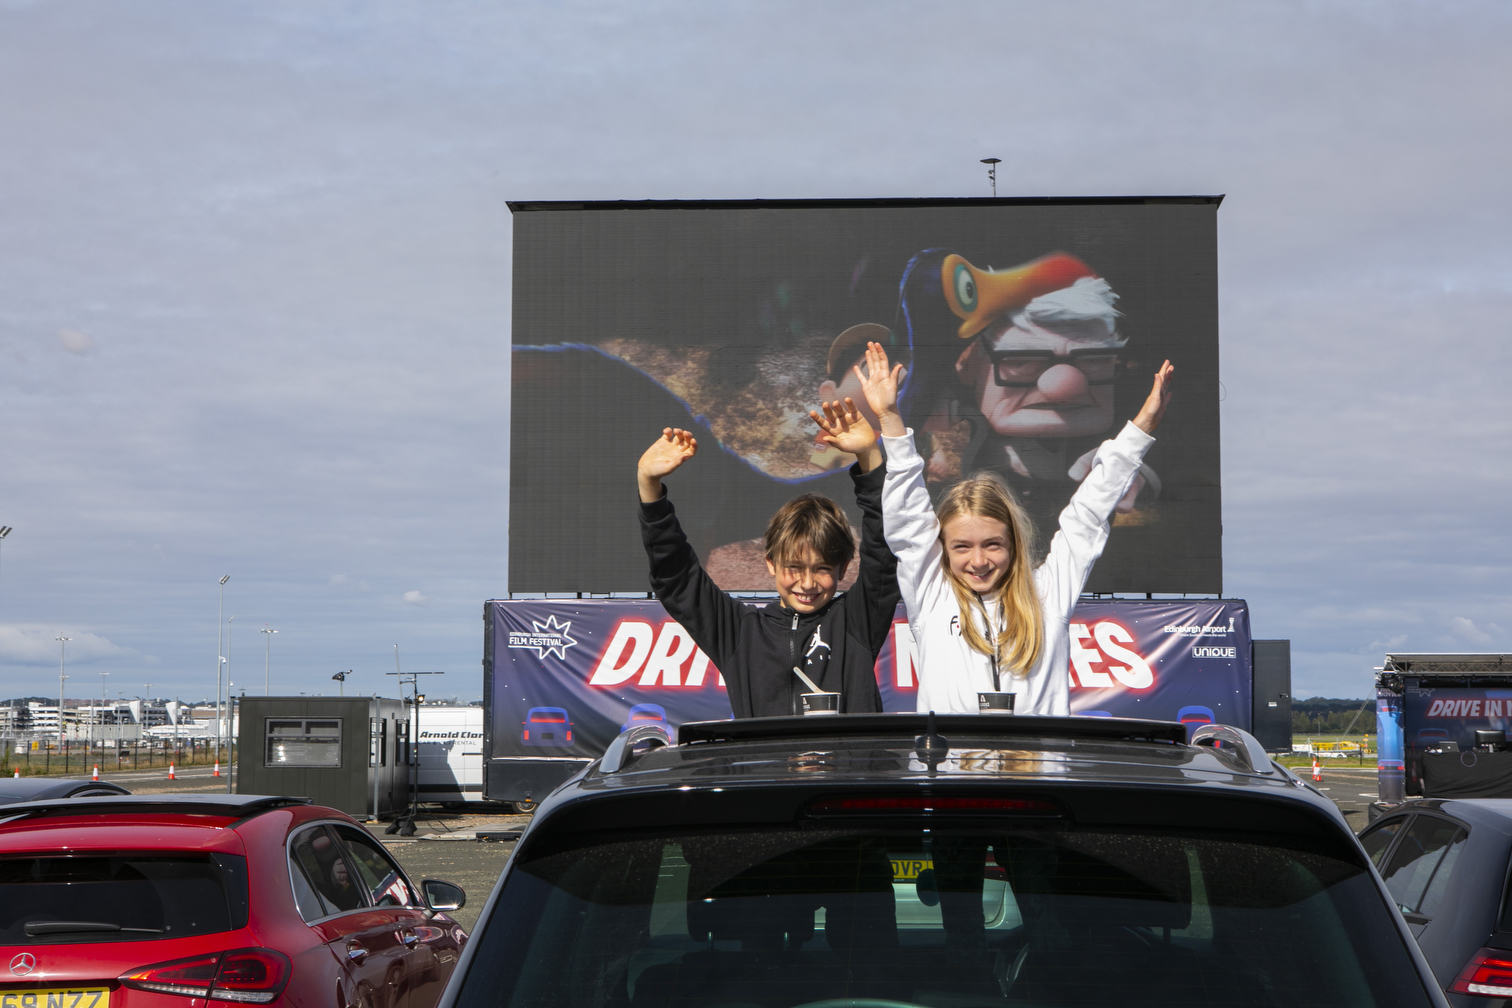 Drive-In Movies Off To A Flyer!